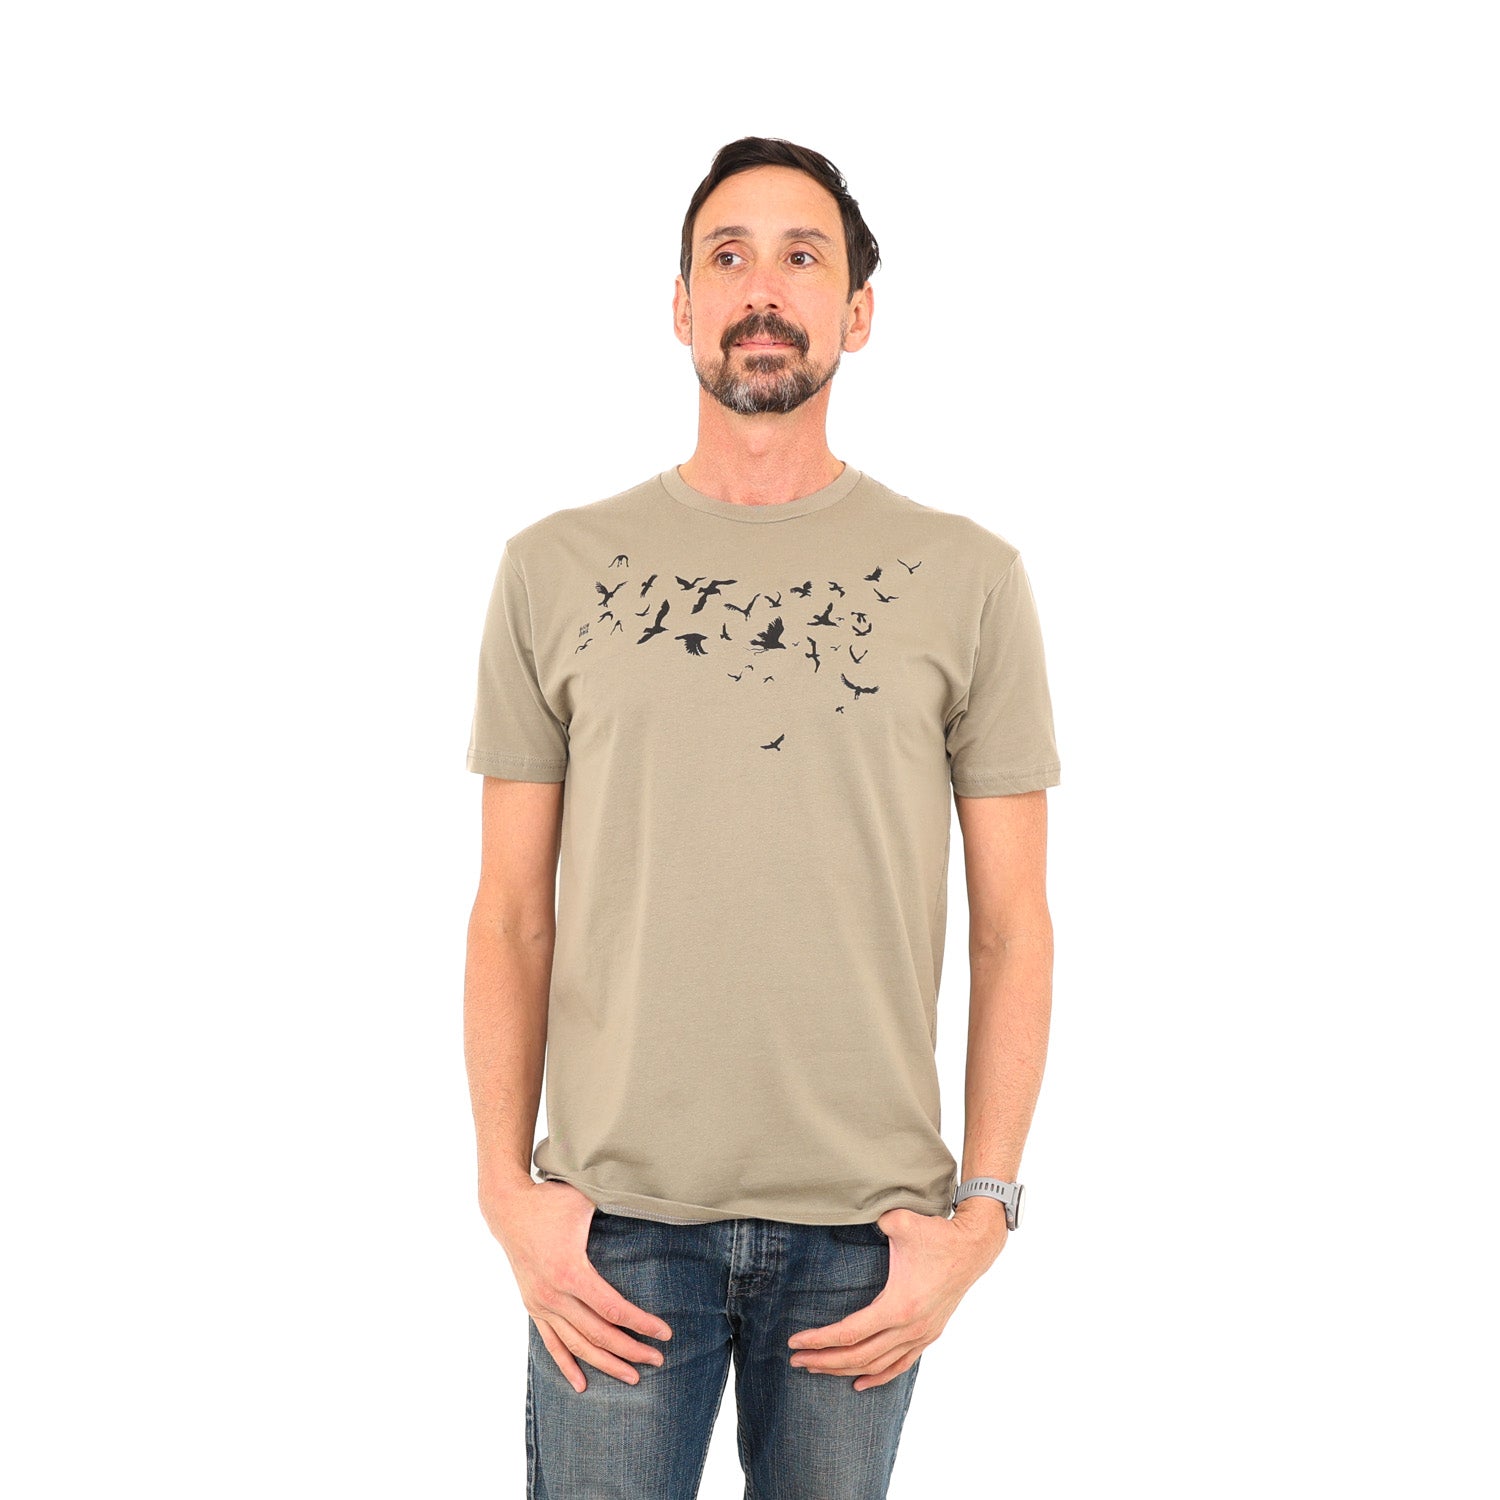 man wearing light brown/tan-ish t-shirt with black ink of birds flying across his chest